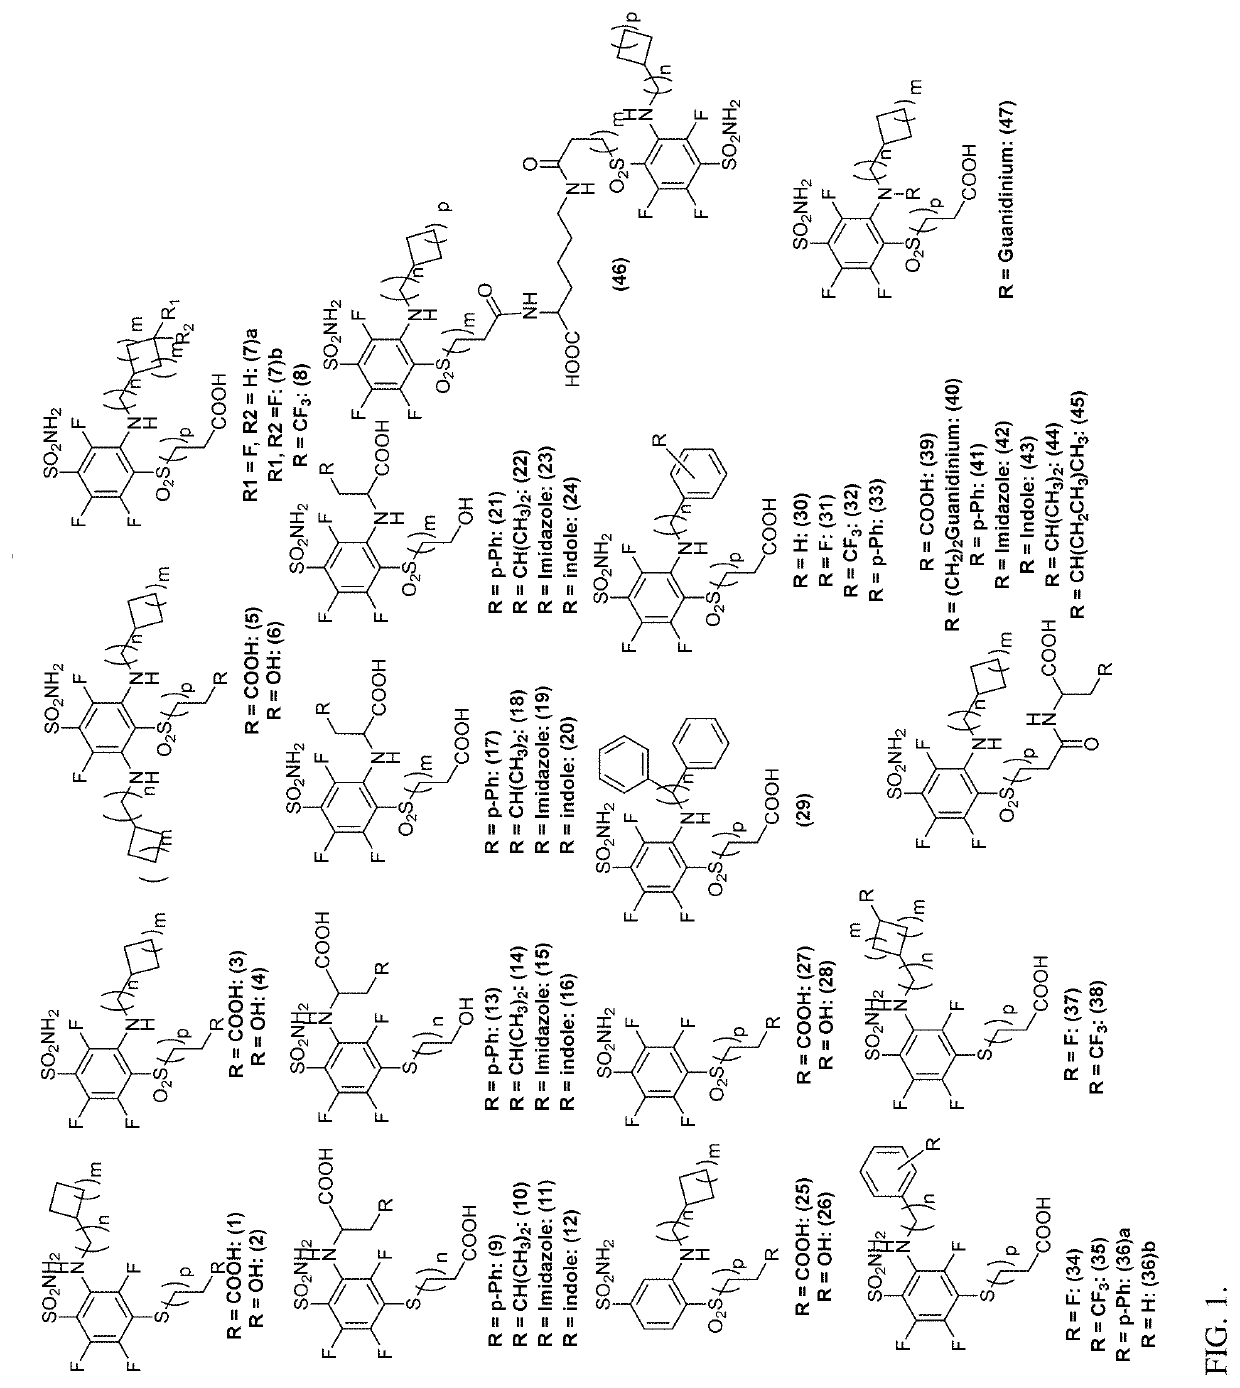 Ca ix - nir dyes and their uses